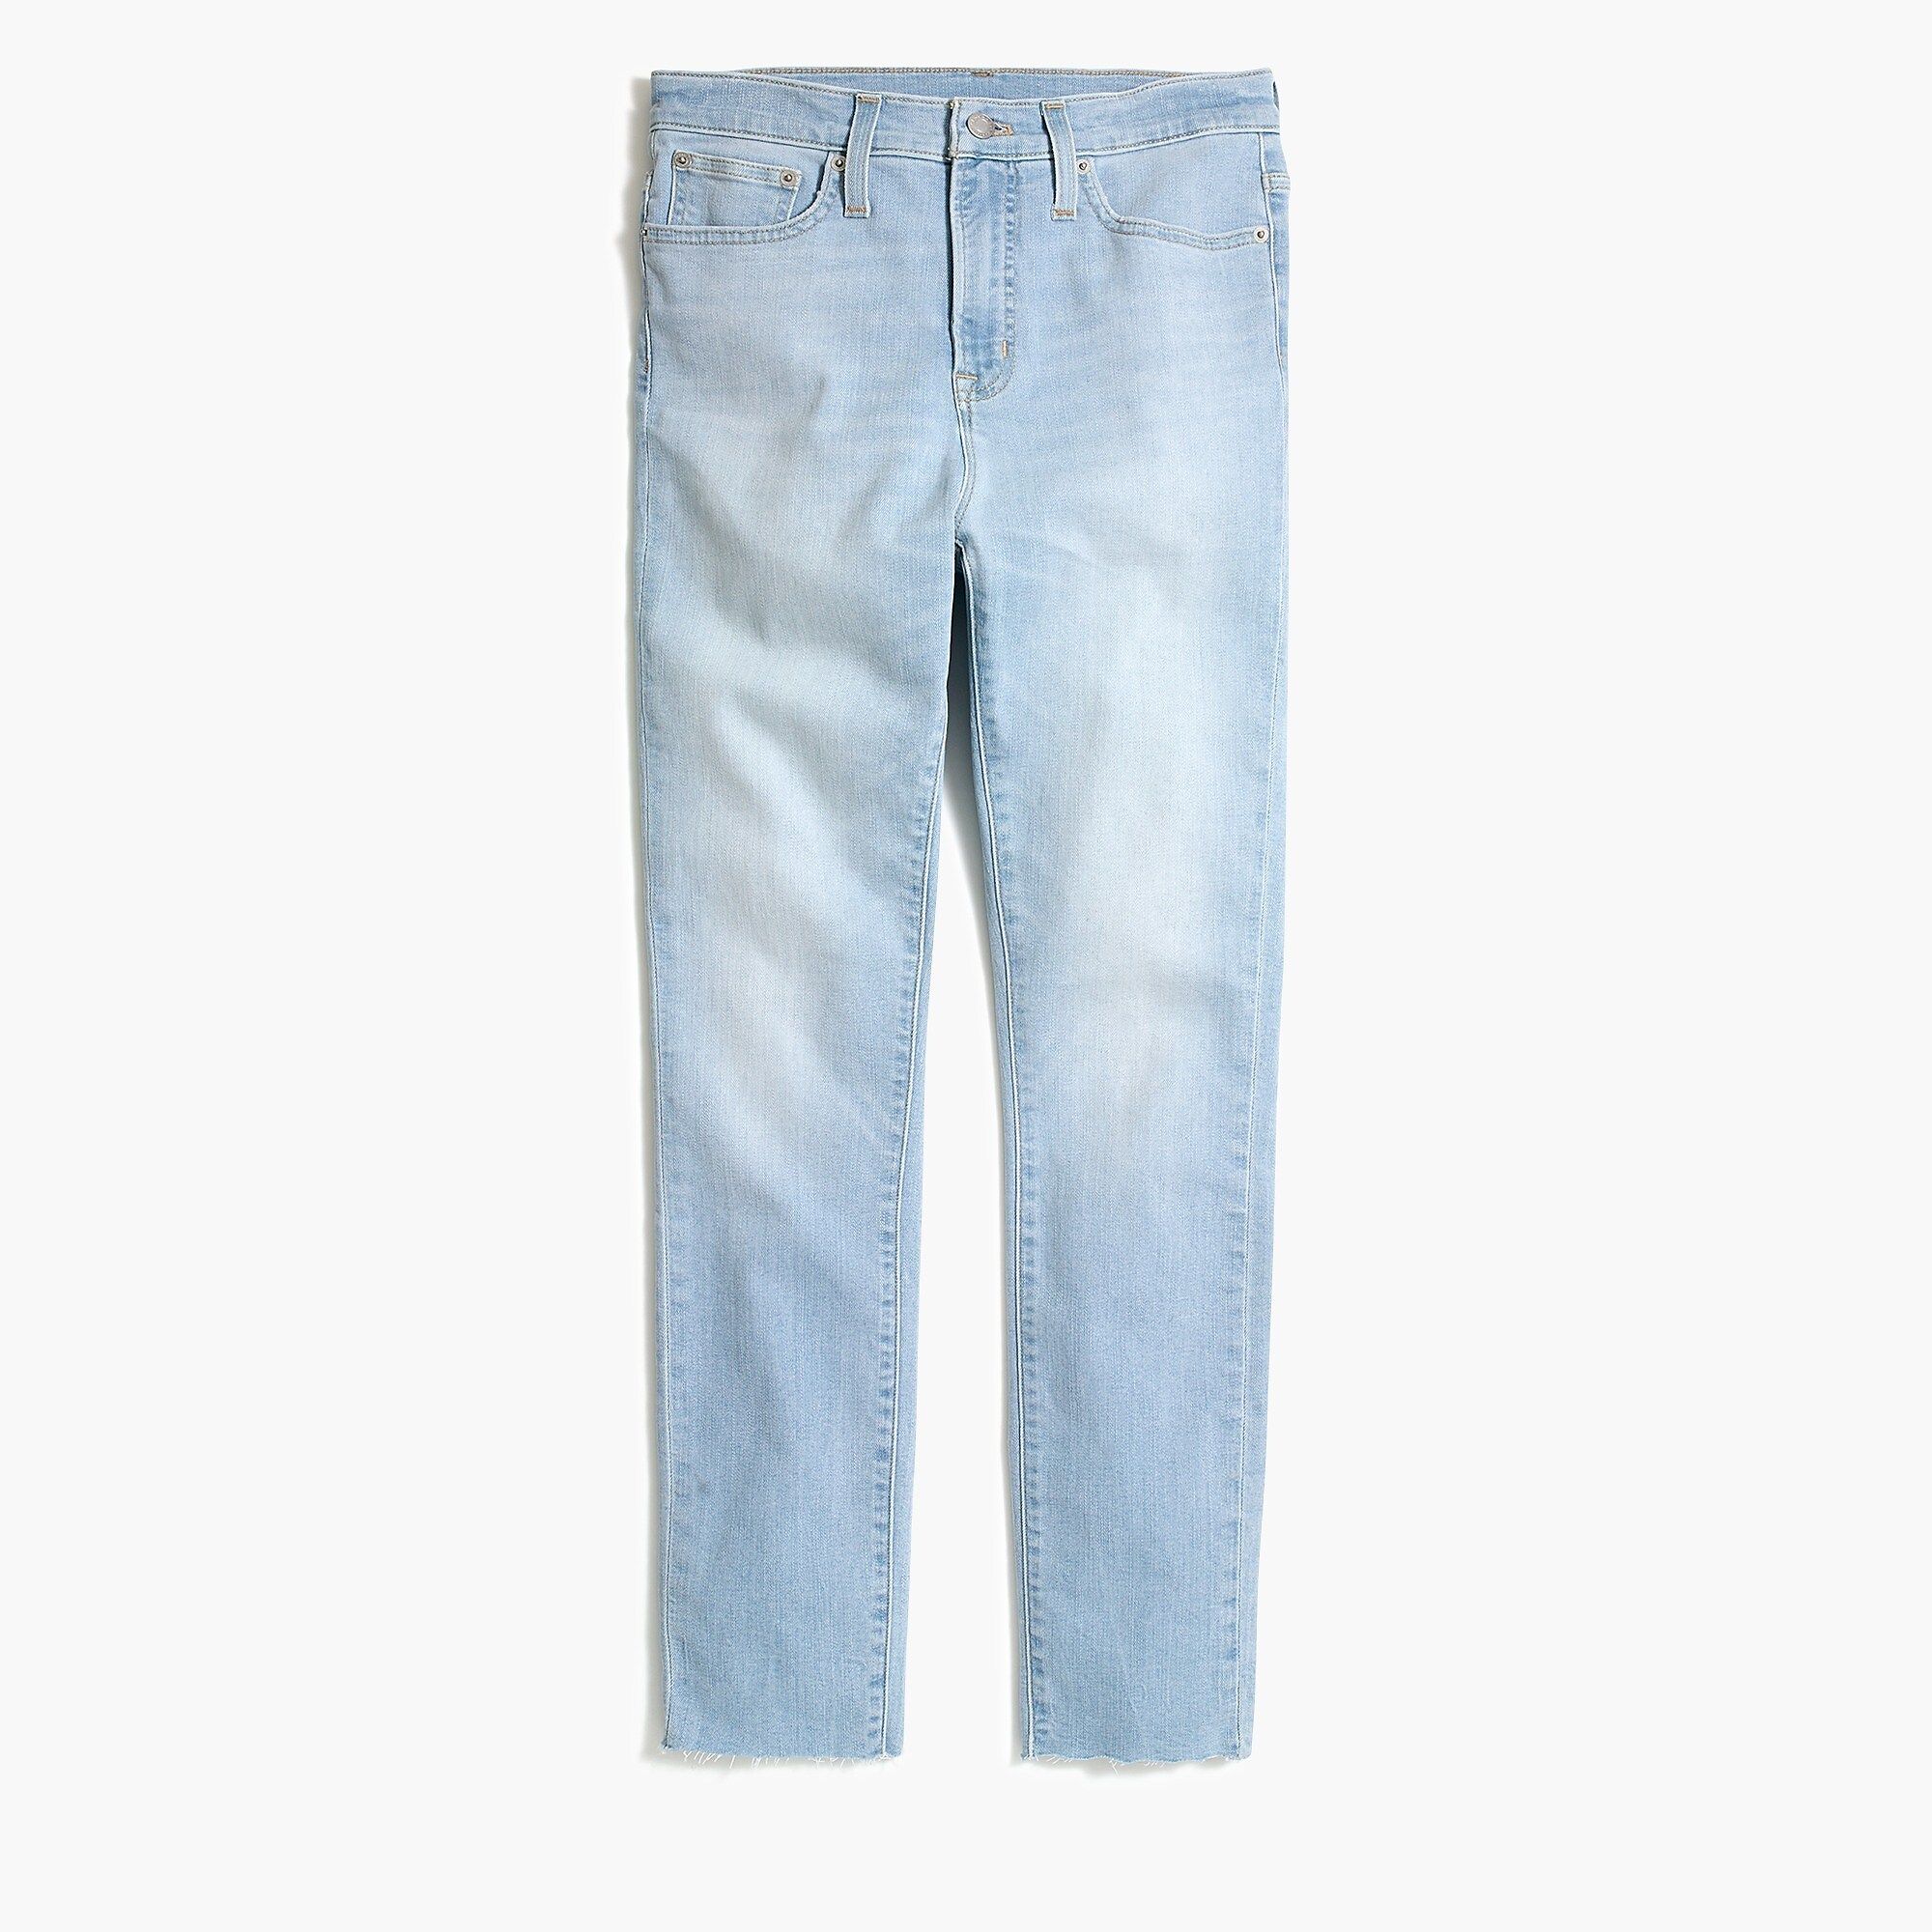 10" highest-rise skinny jean with chewed hem | J.Crew Factory